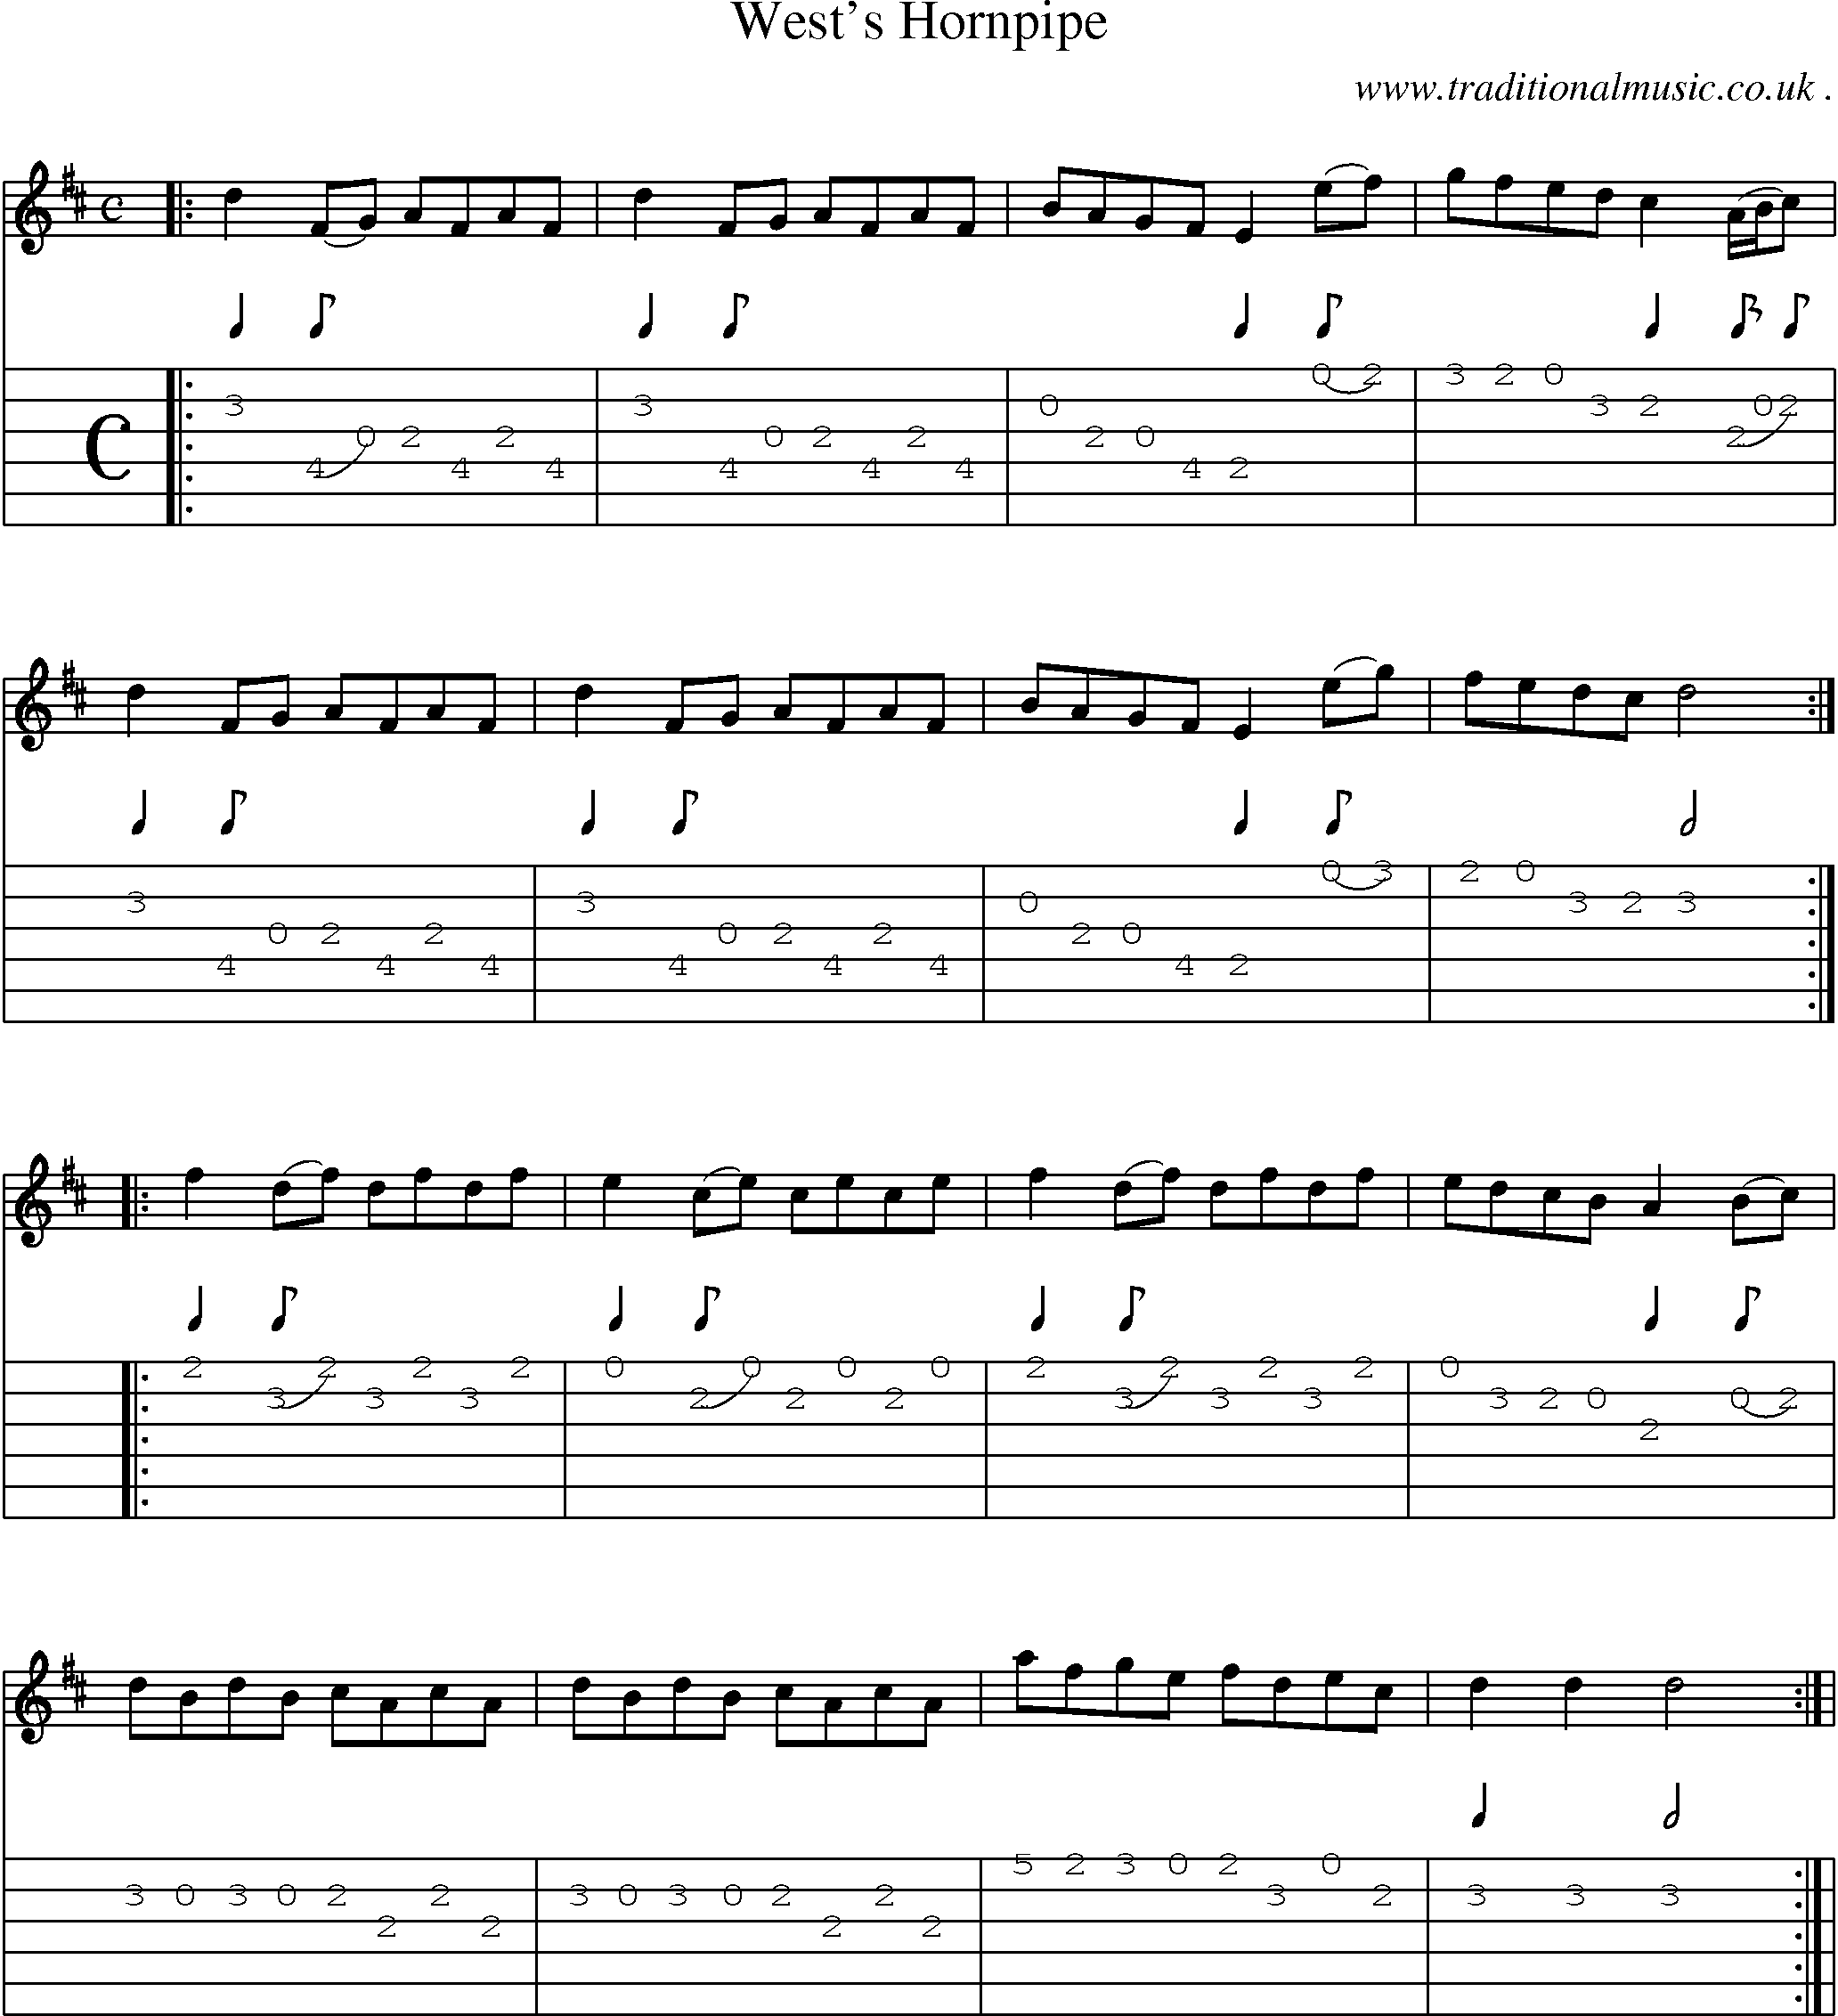 Sheet-Music and Guitar Tabs for Wests Hornpipe